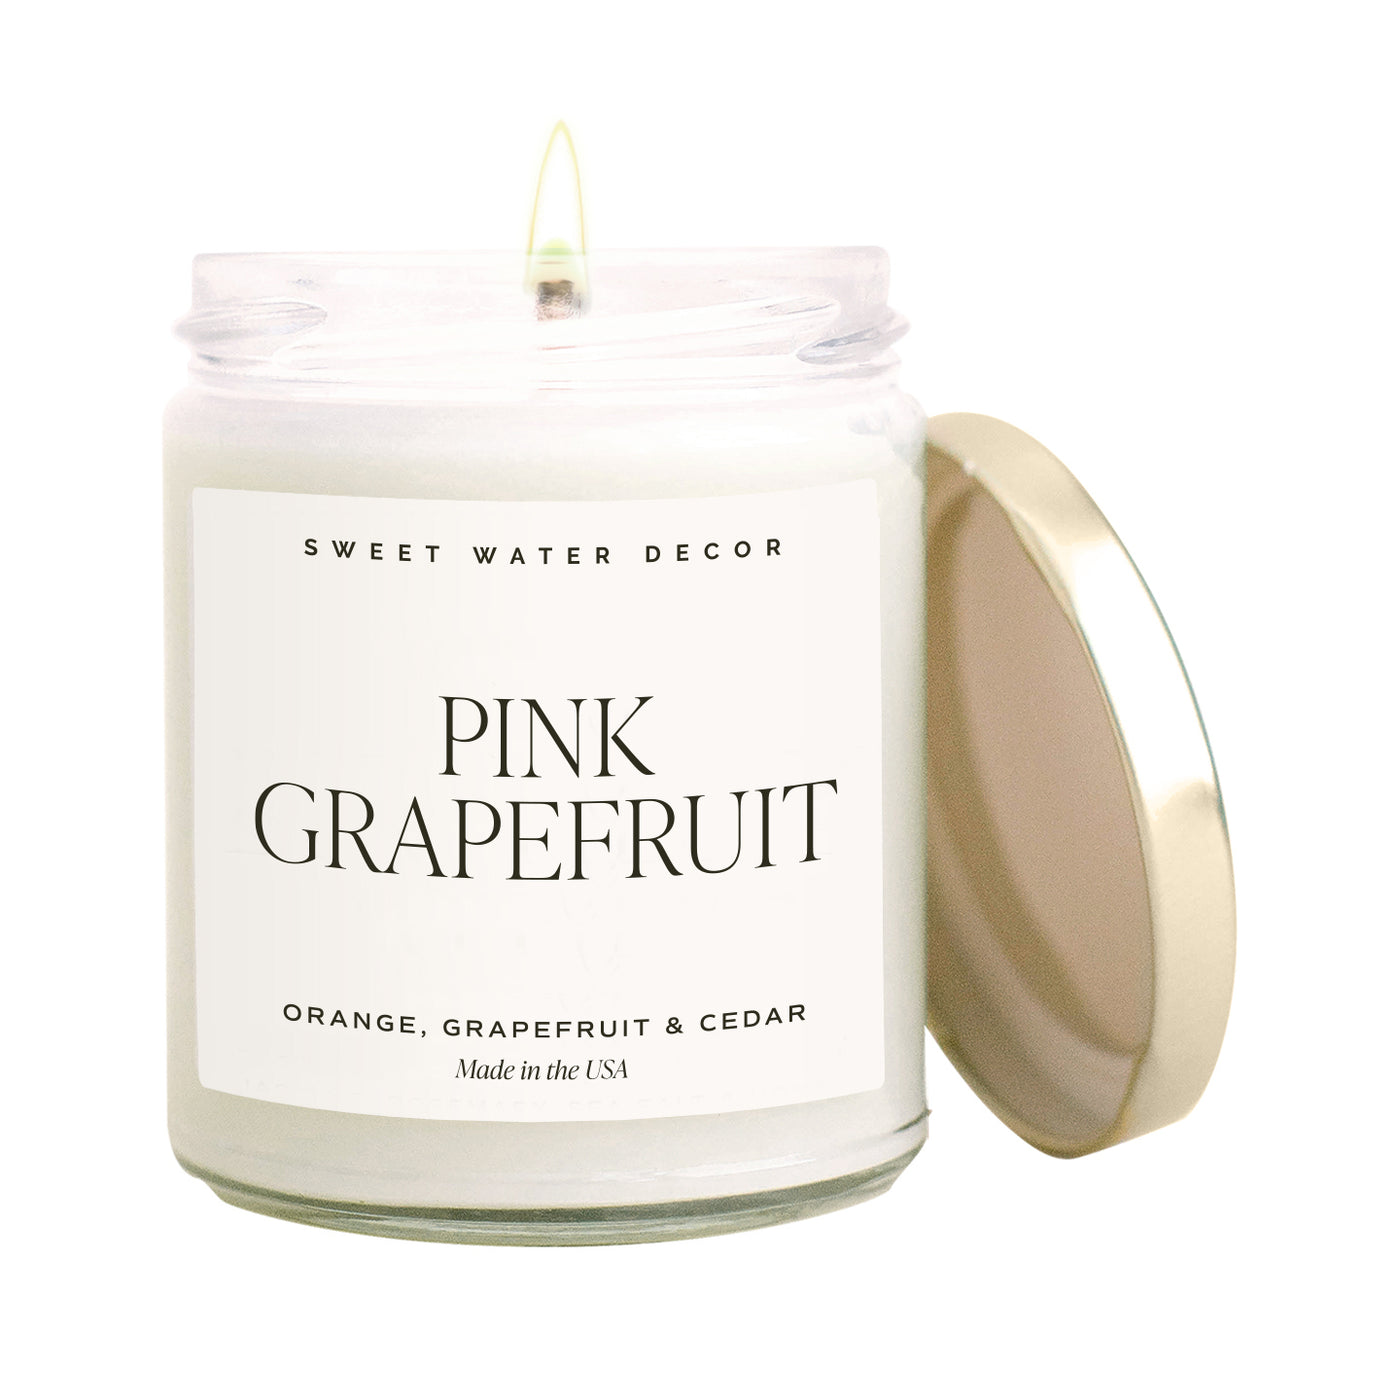 Clear Candle Jar with gold lid. Pink Grapefruit label and scent notes of orange, grapefruit, and cedar.